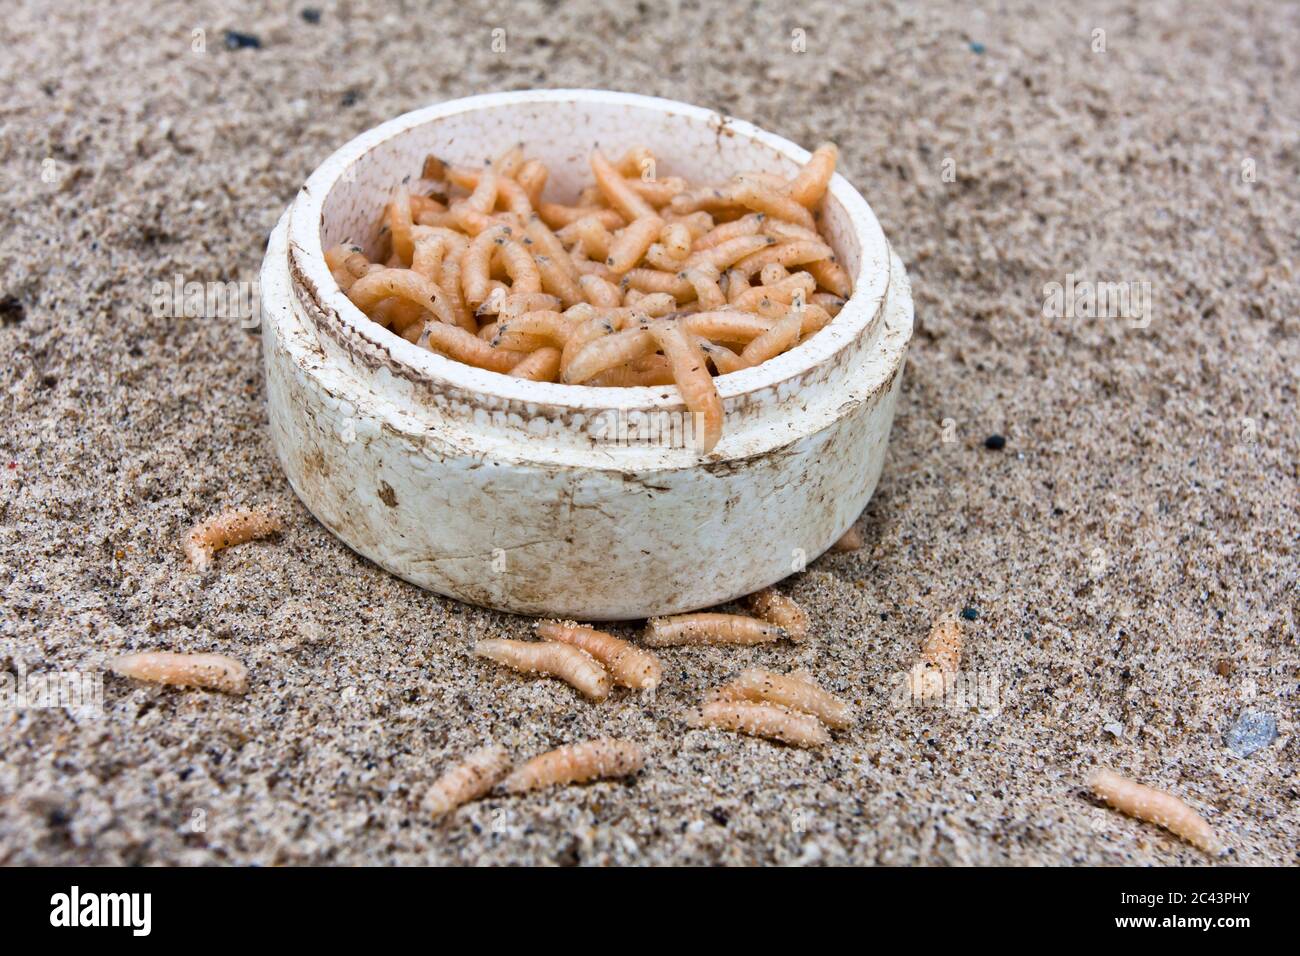 maggot in the box on the sand Stock Photo